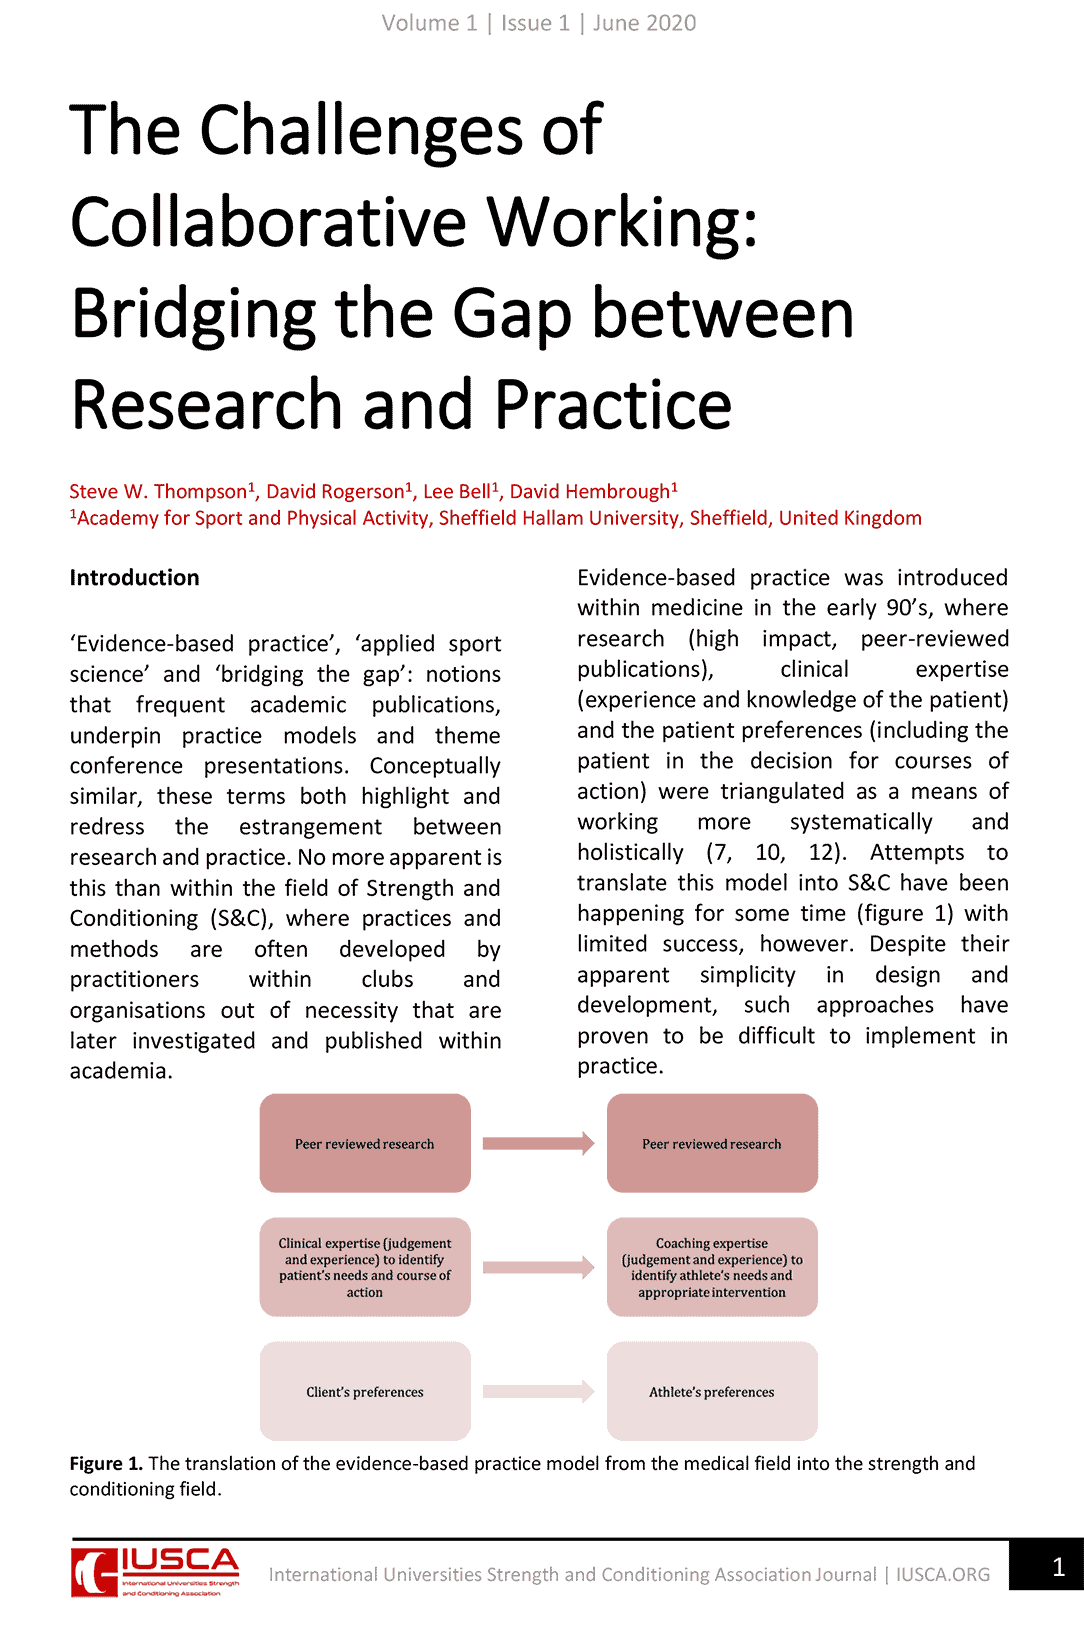 The Challenges of Collaborative Working: Bridging the Gap between Research and Practice